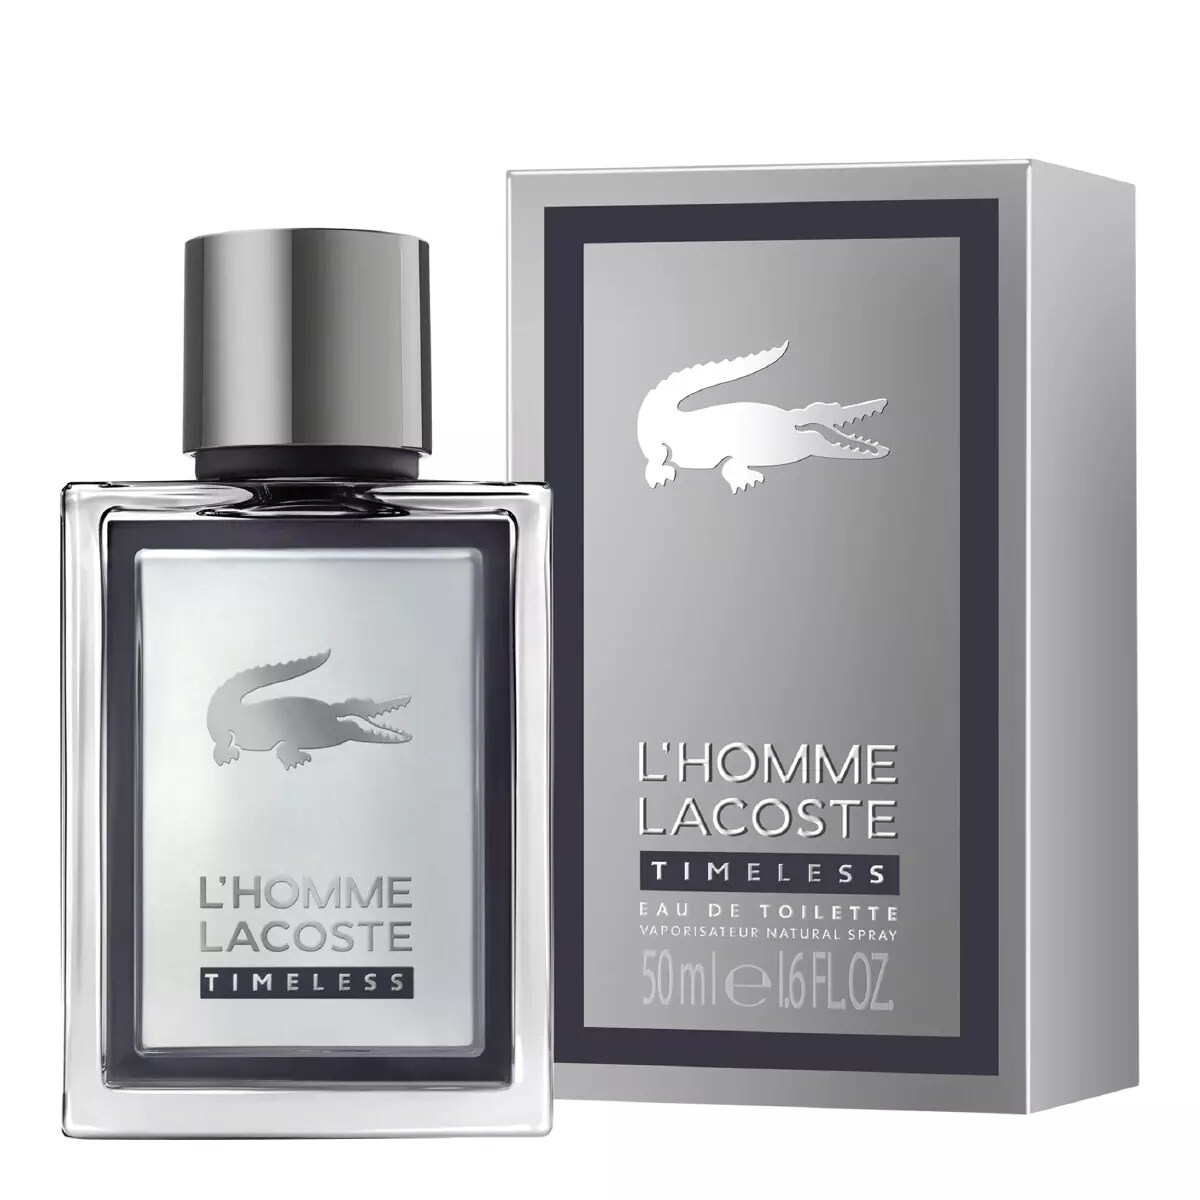 Lacoste pure homme